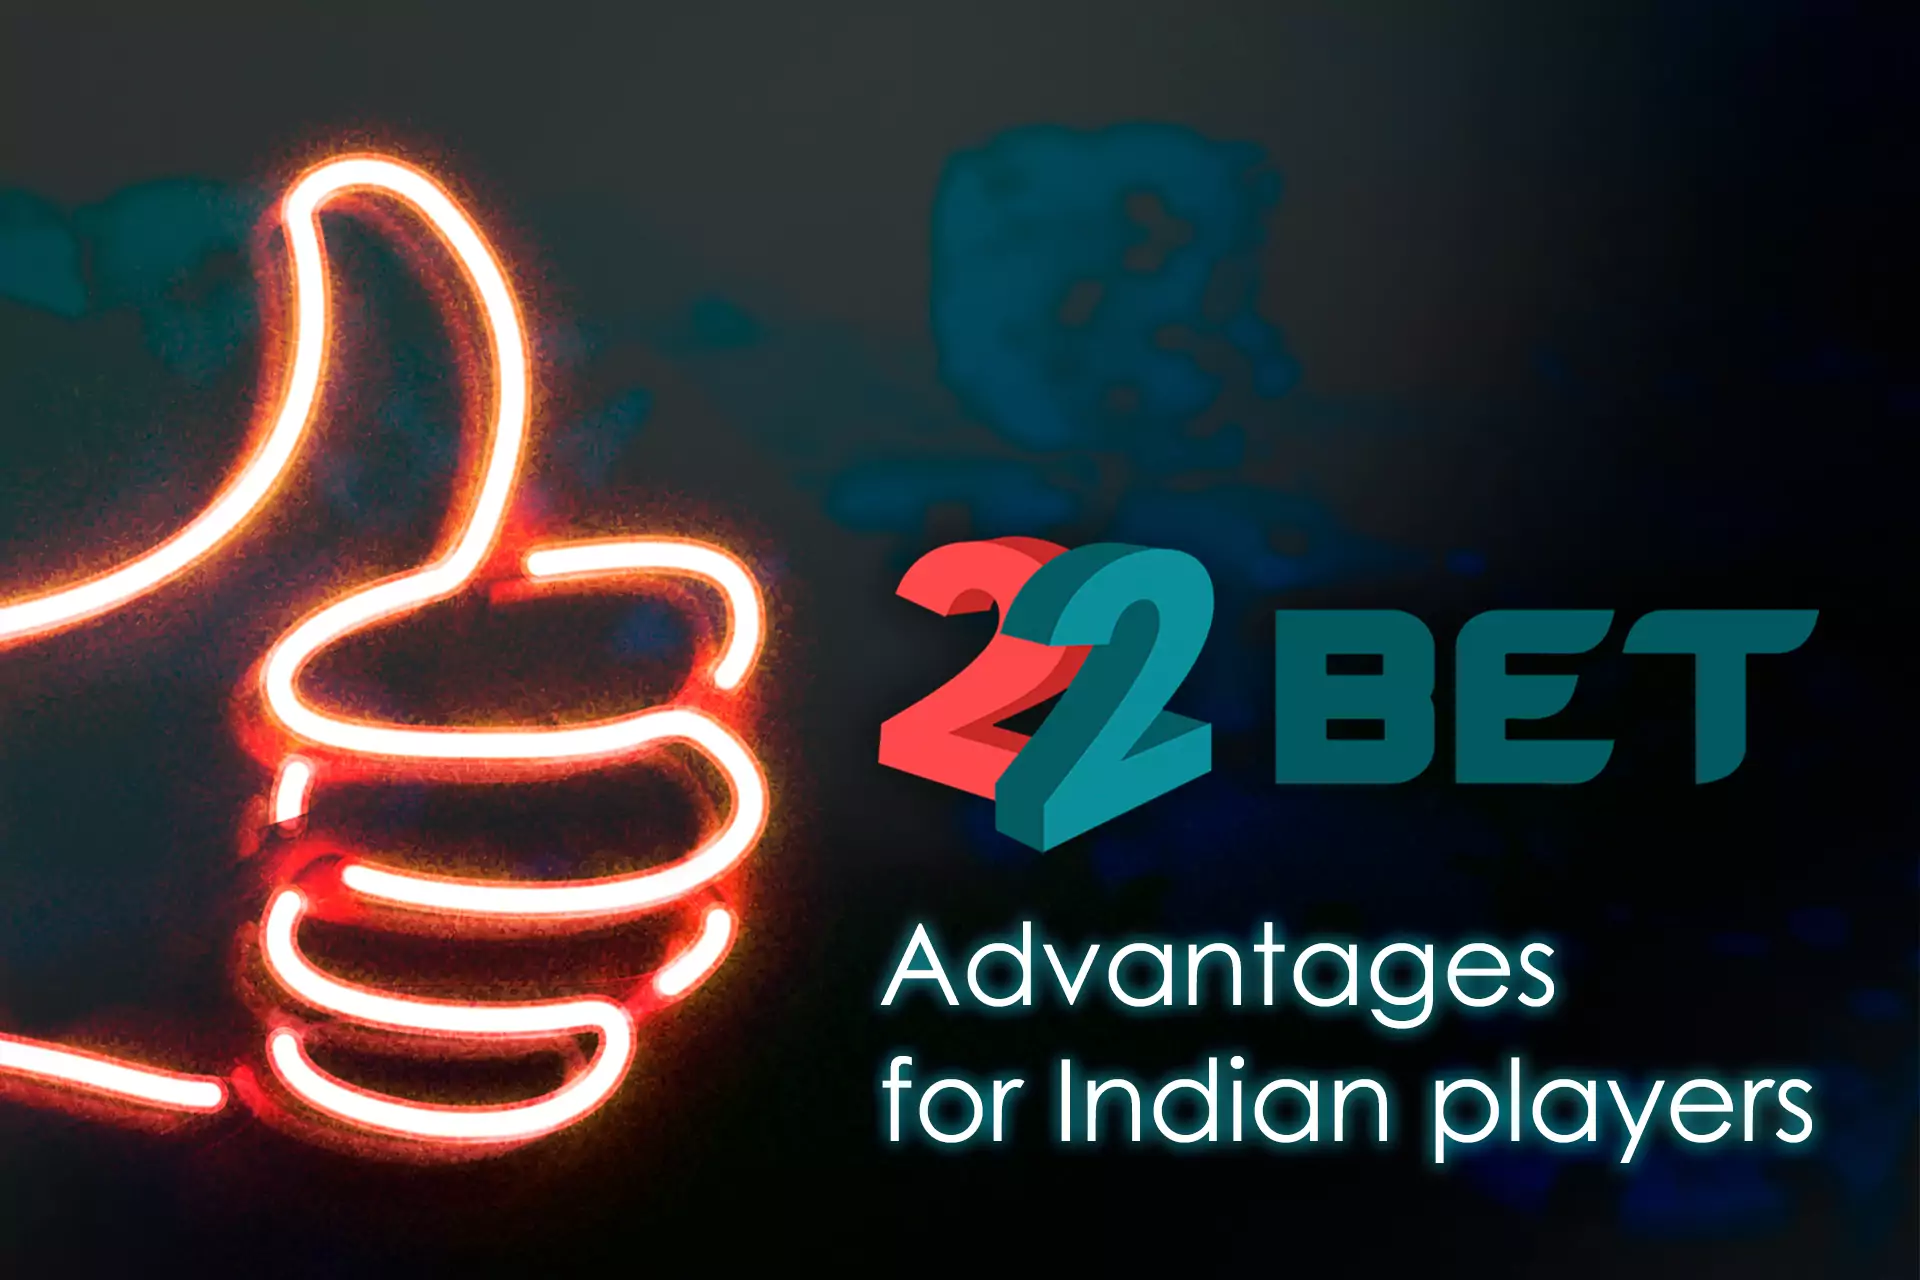 Players from India like the 22bet Casino for a generous welcome bonus and great applications for Android and iOS.